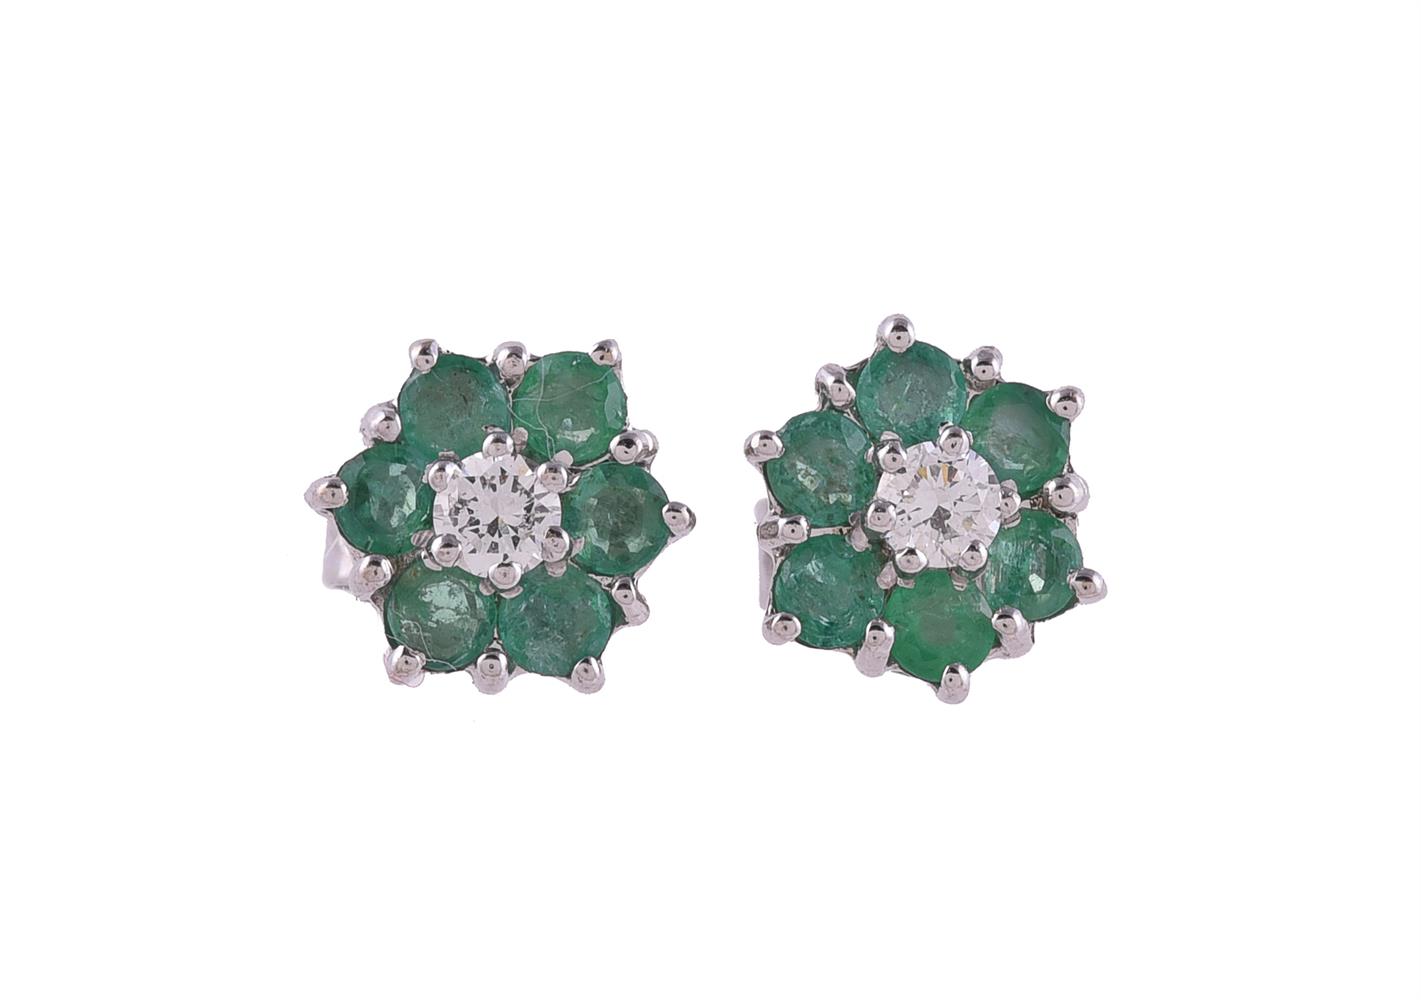 A PAIR OF EMERALD AND DIAMOND CLUSTER EAR STUDS